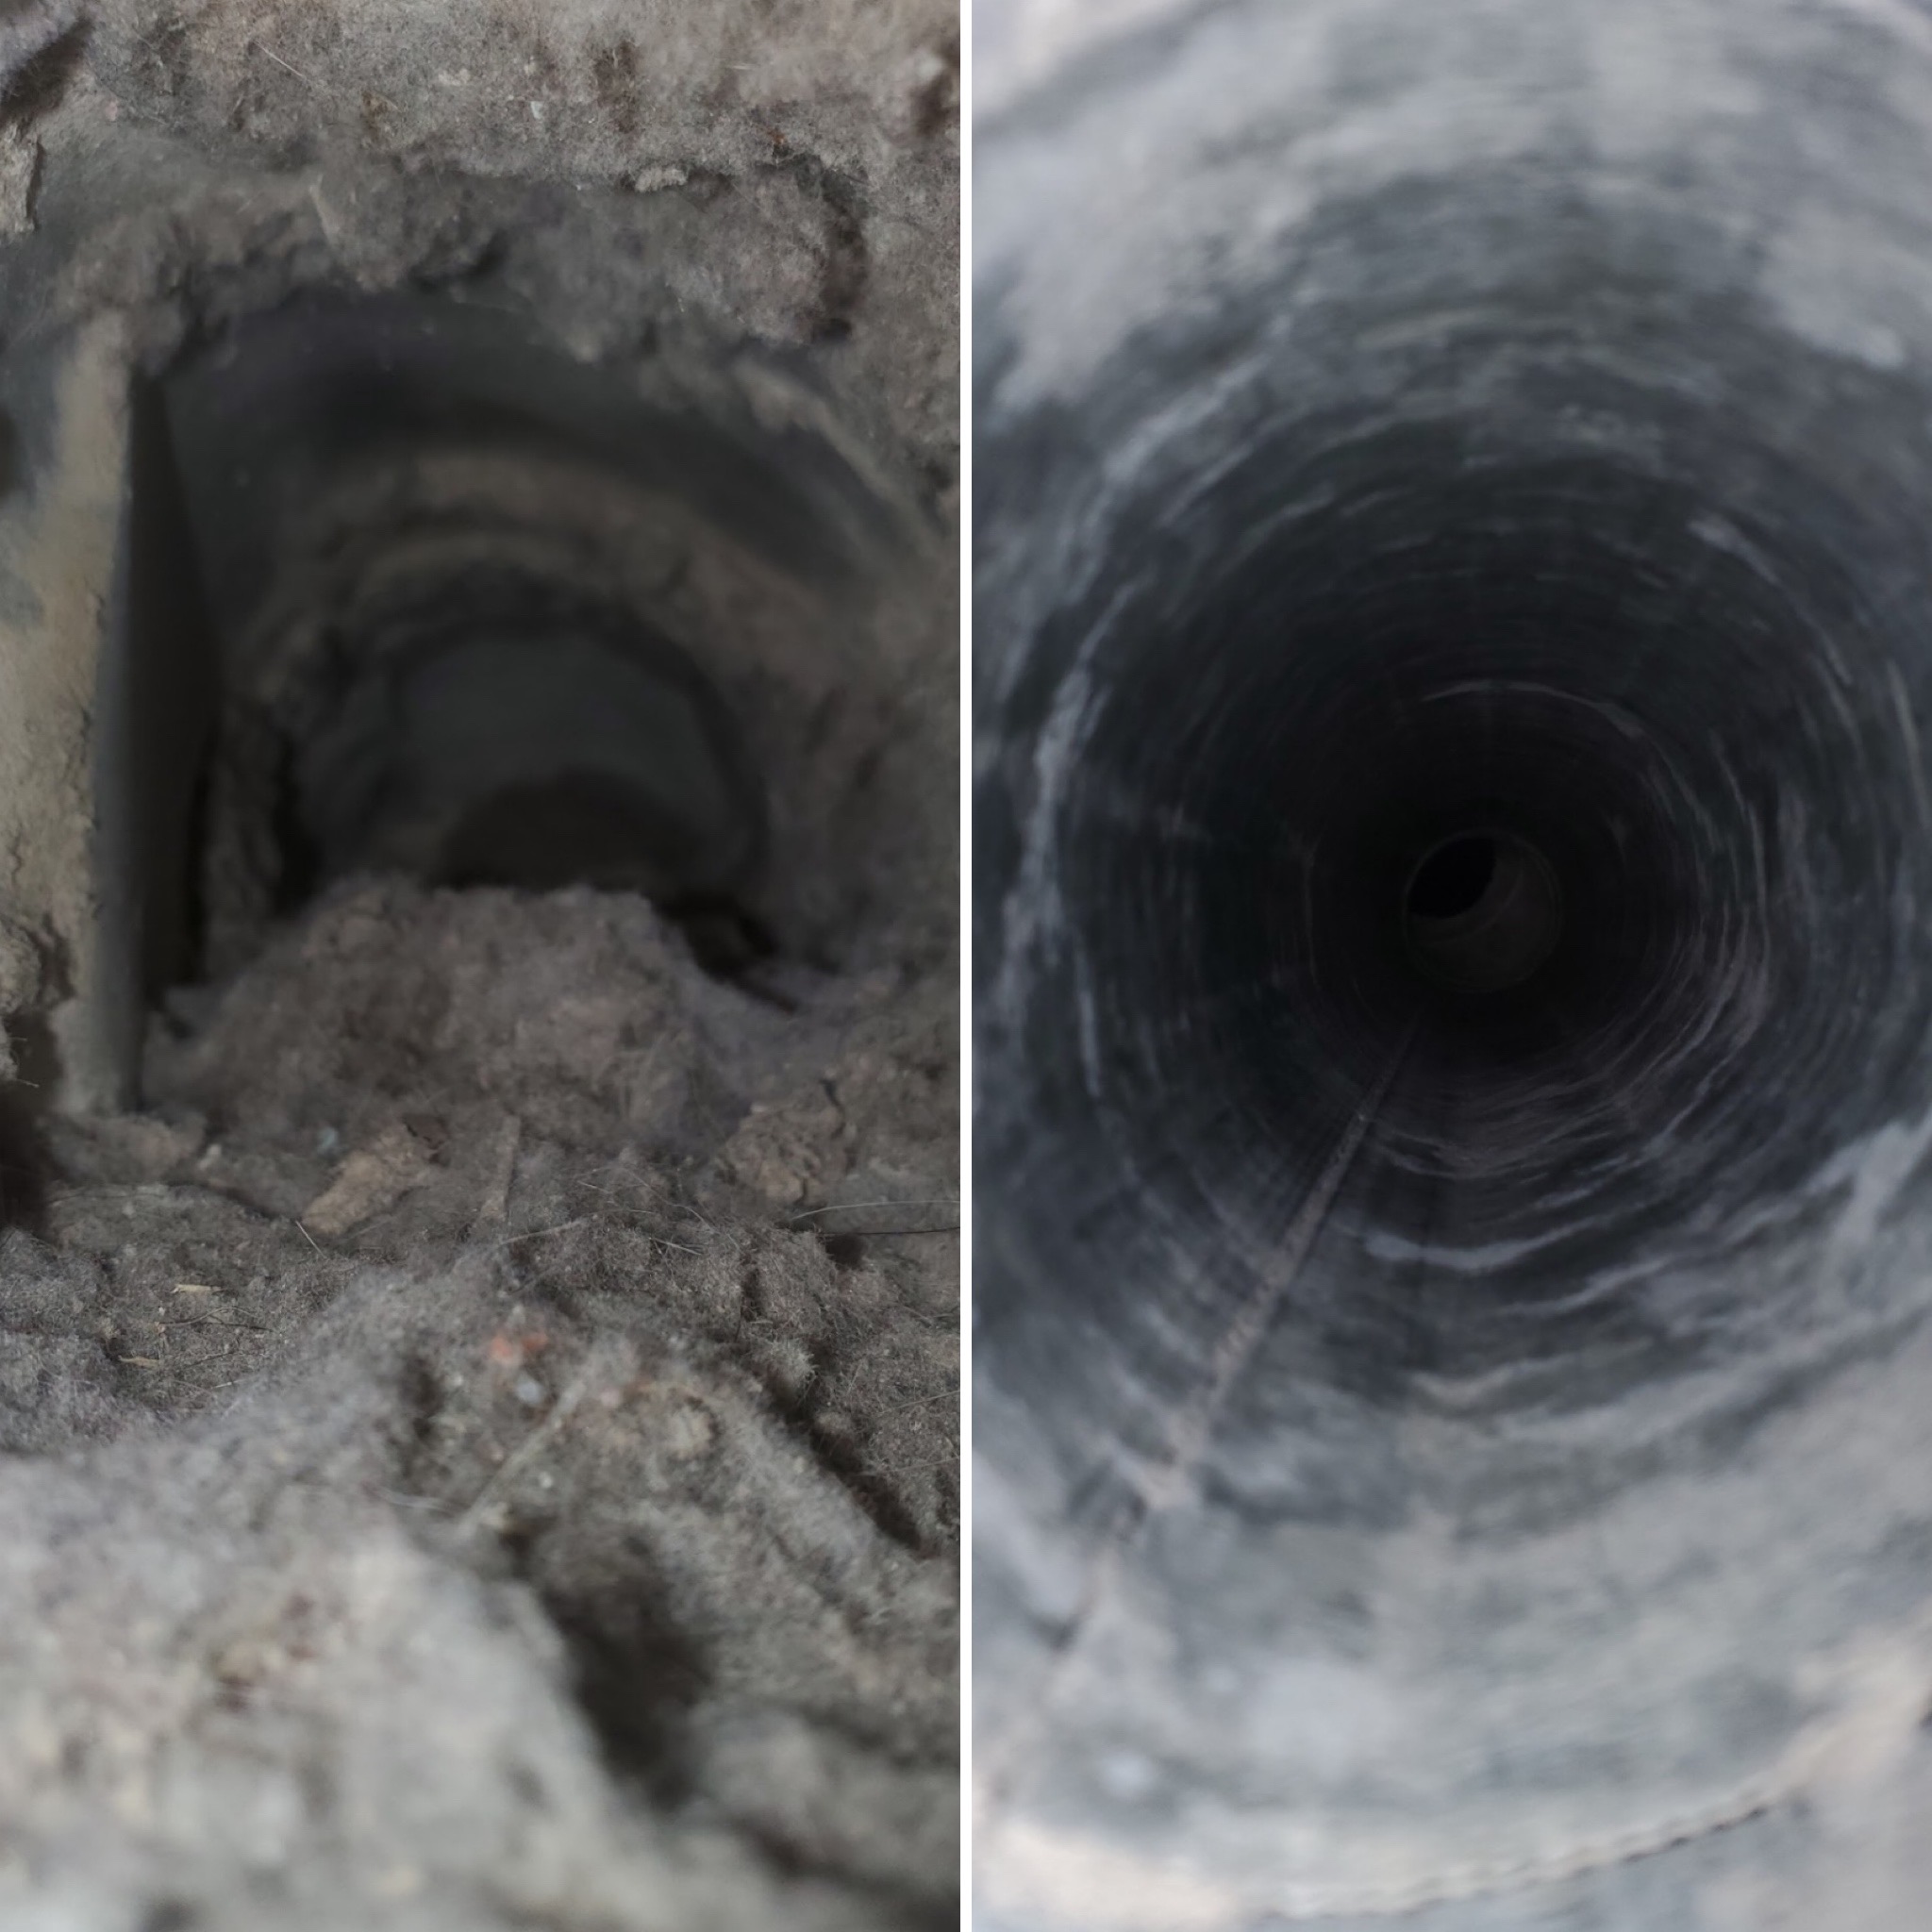 Dryer Vent Cleaning Seriously Clogged Vent in Austin, Texas (Image Not Found)